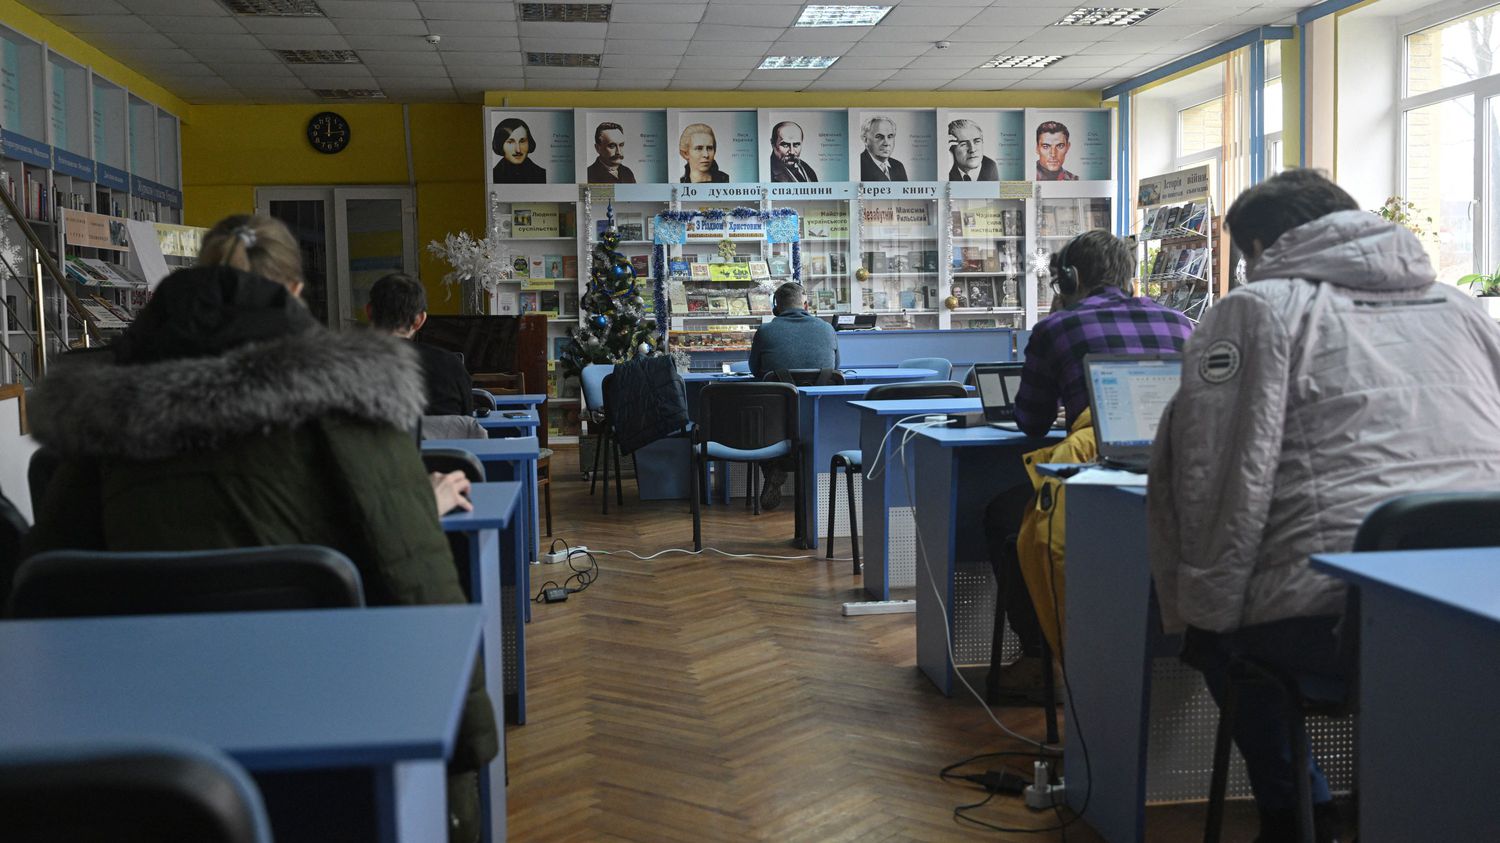 Ukraine: the municipal library of Irpin has become the beating heart of this martyred city
